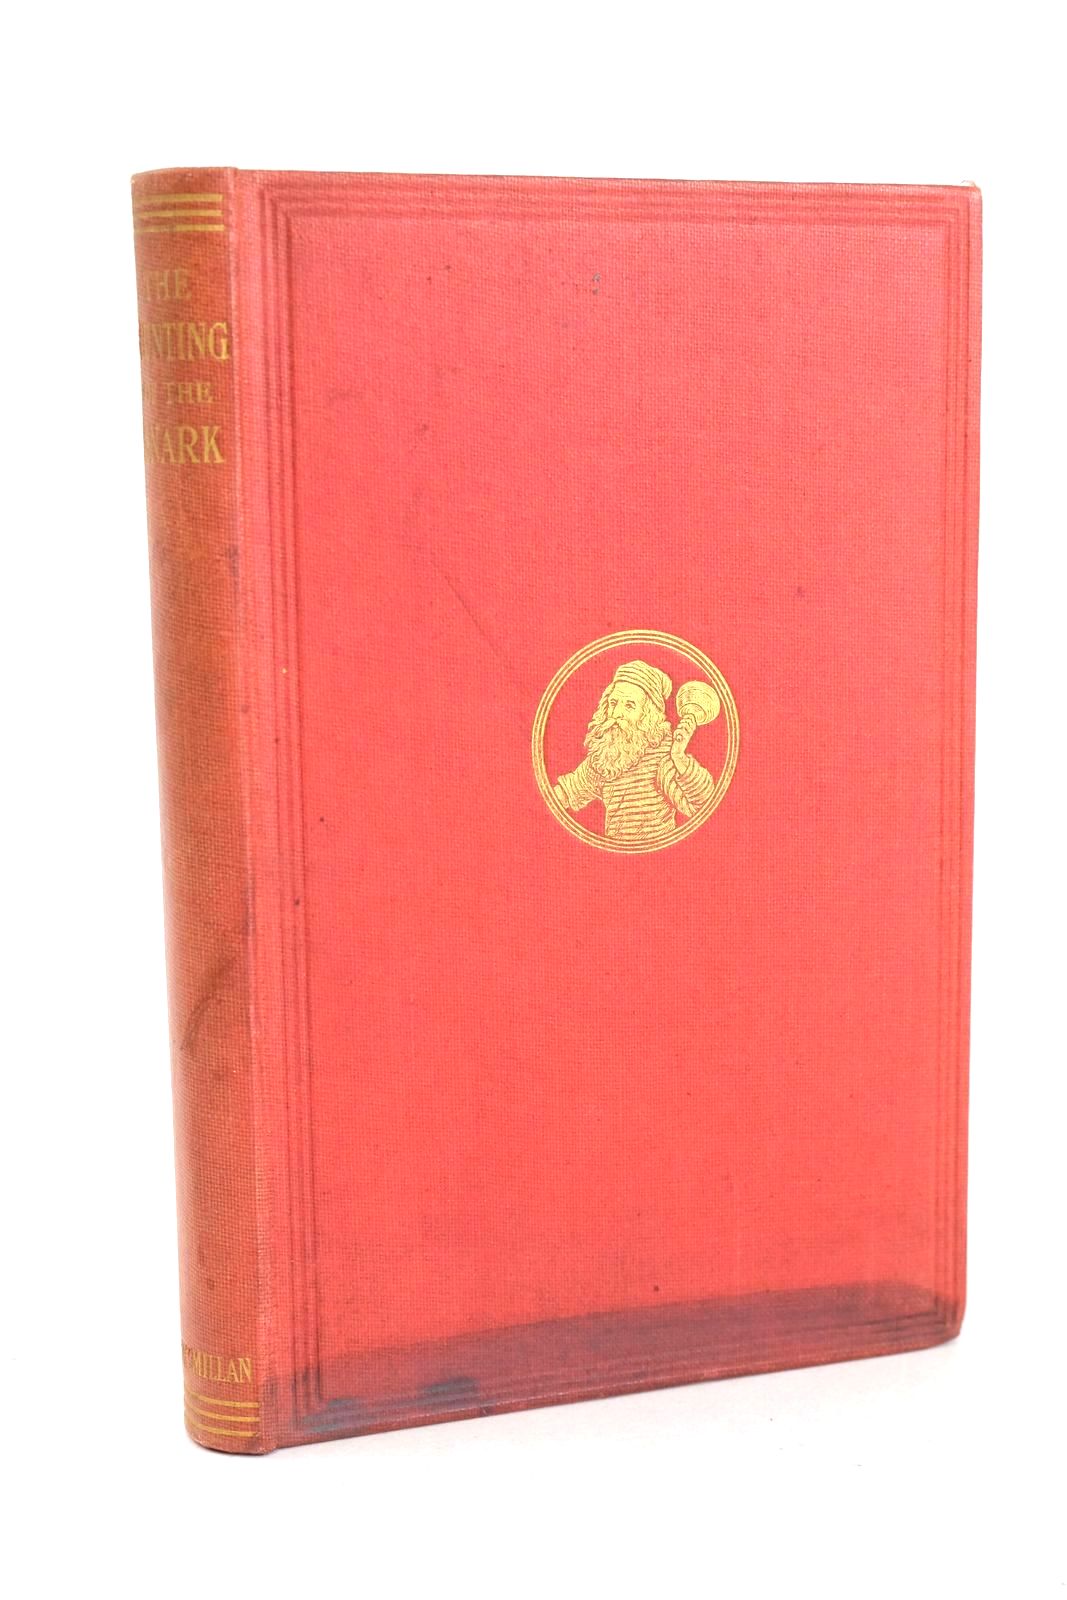 Photo of THE HUNTING OF THE SNARK written by Carroll, Lewis illustrated by Holiday, Henry published by Macmillan &amp; Co. Ltd. (STOCK CODE: 1325908)  for sale by Stella & Rose's Books